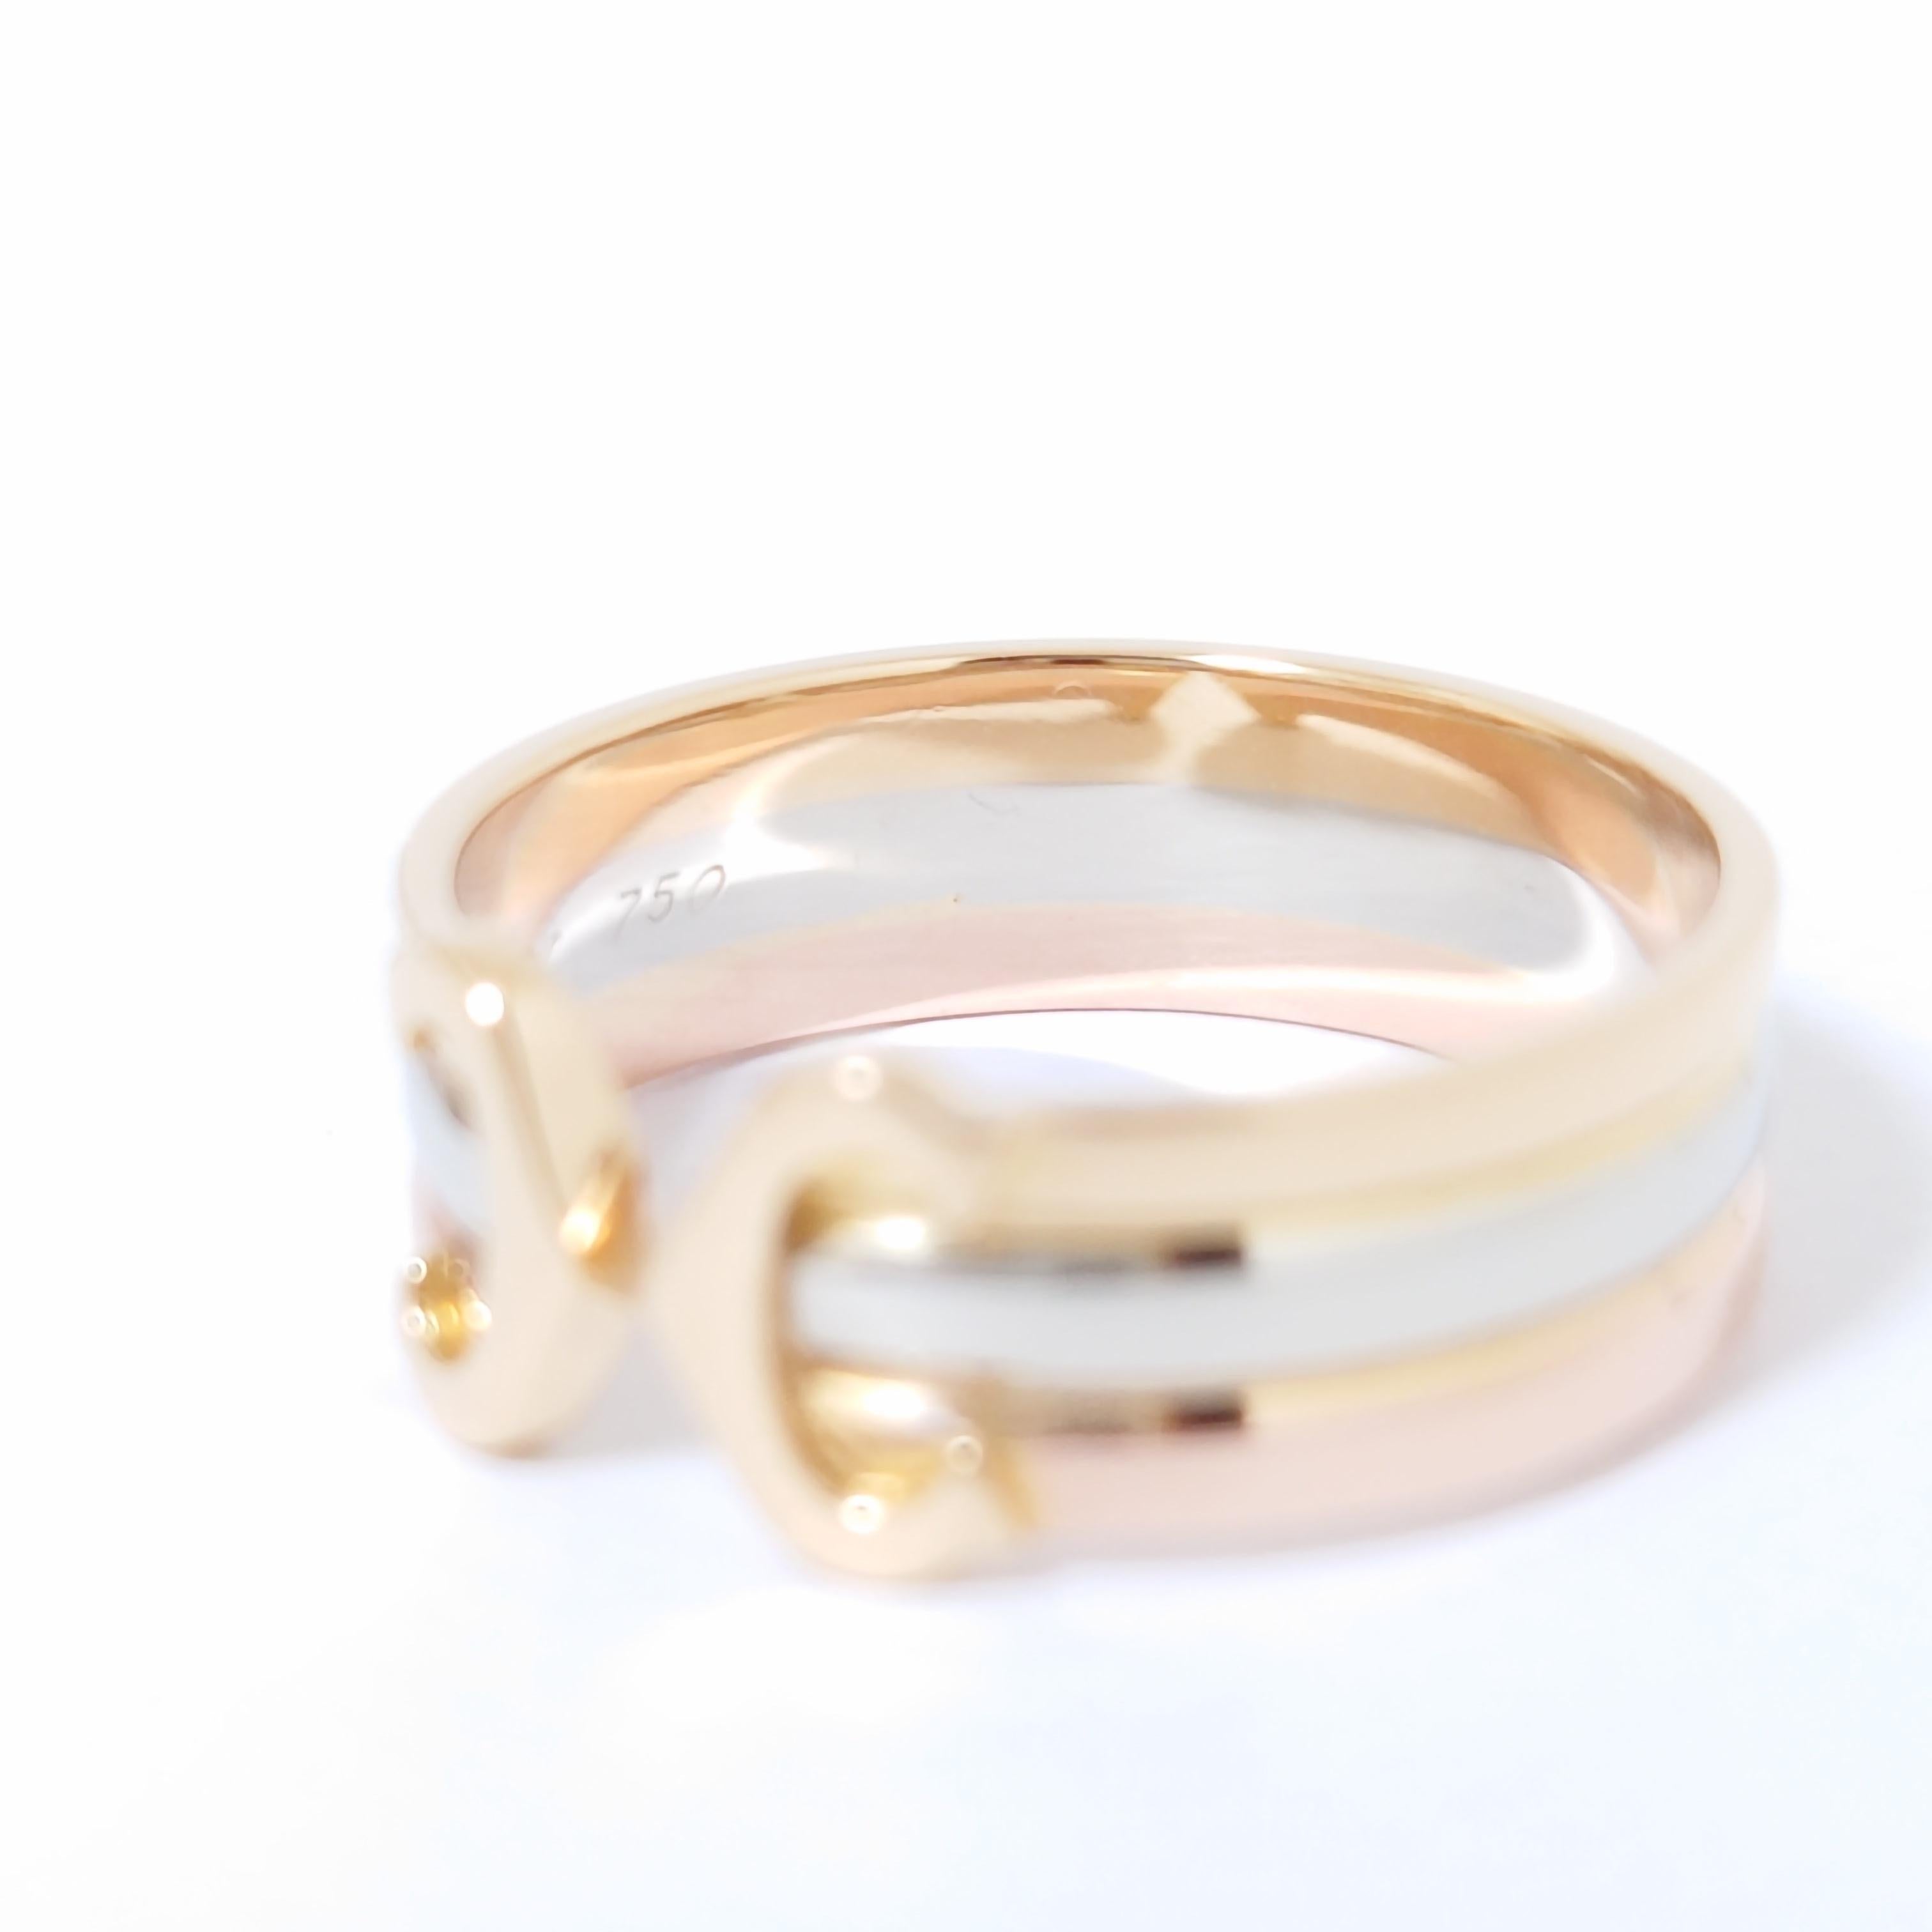 Cartier 2C Ring 18KYG/PG/WG In Excellent Condition For Sale In Hokkaido, JP